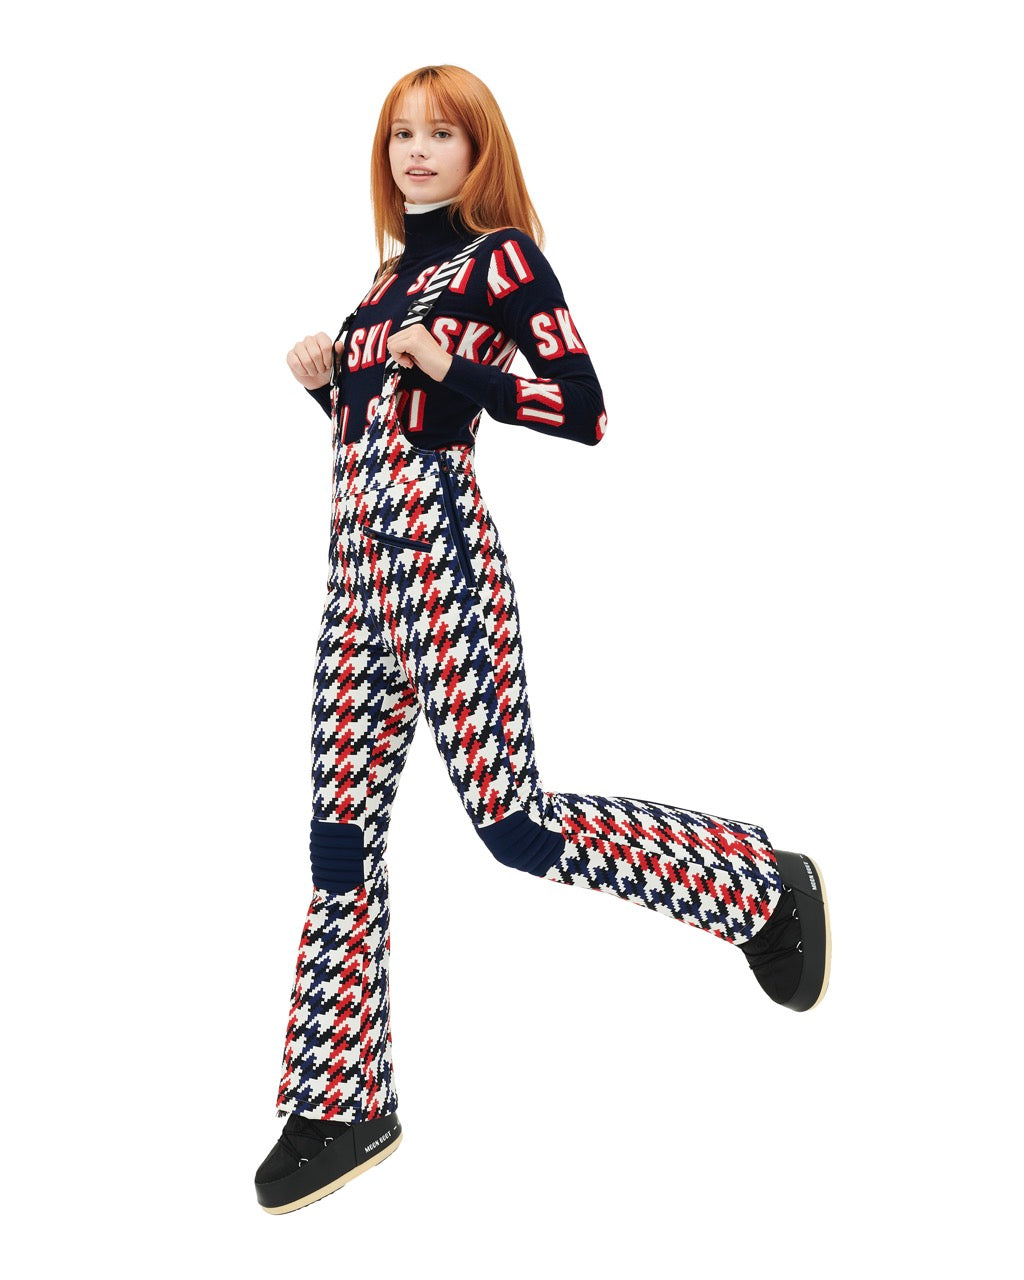 Perfect Moment Women's Houndstooth Isola San Ski Pant - Red, White & Navy